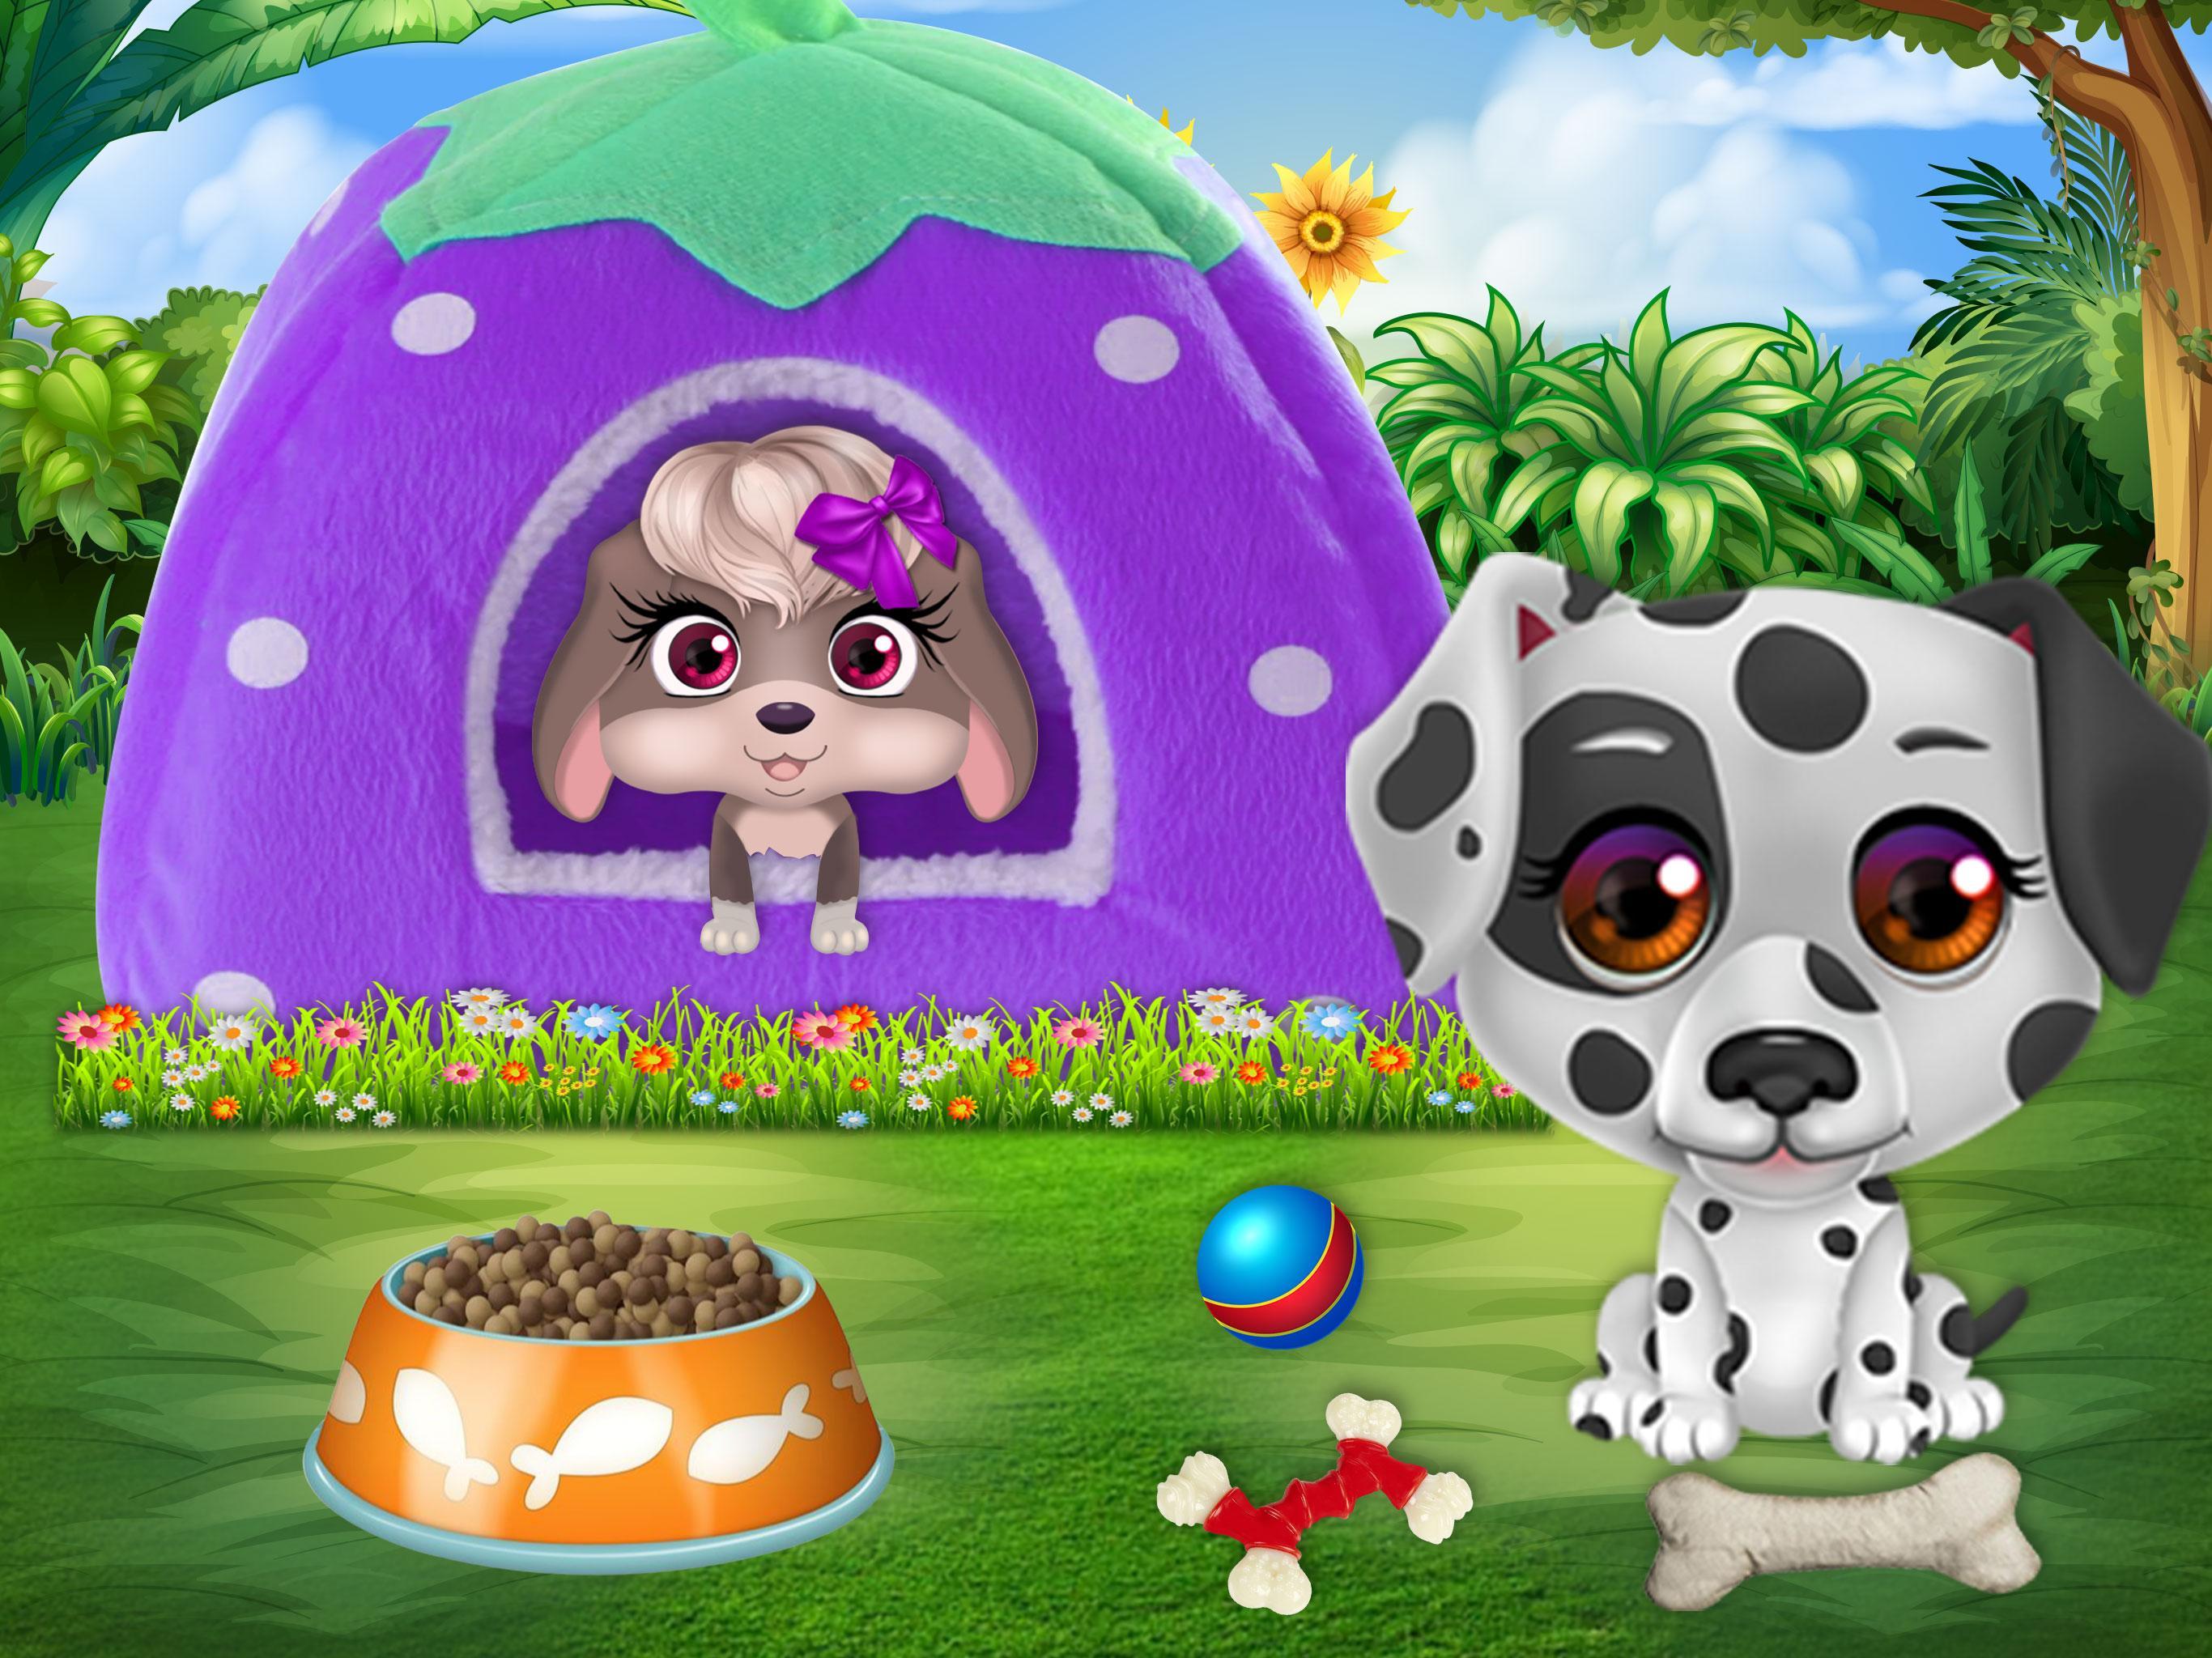 Mine pet home. Pet Home decorations game. Home Pets fillword.